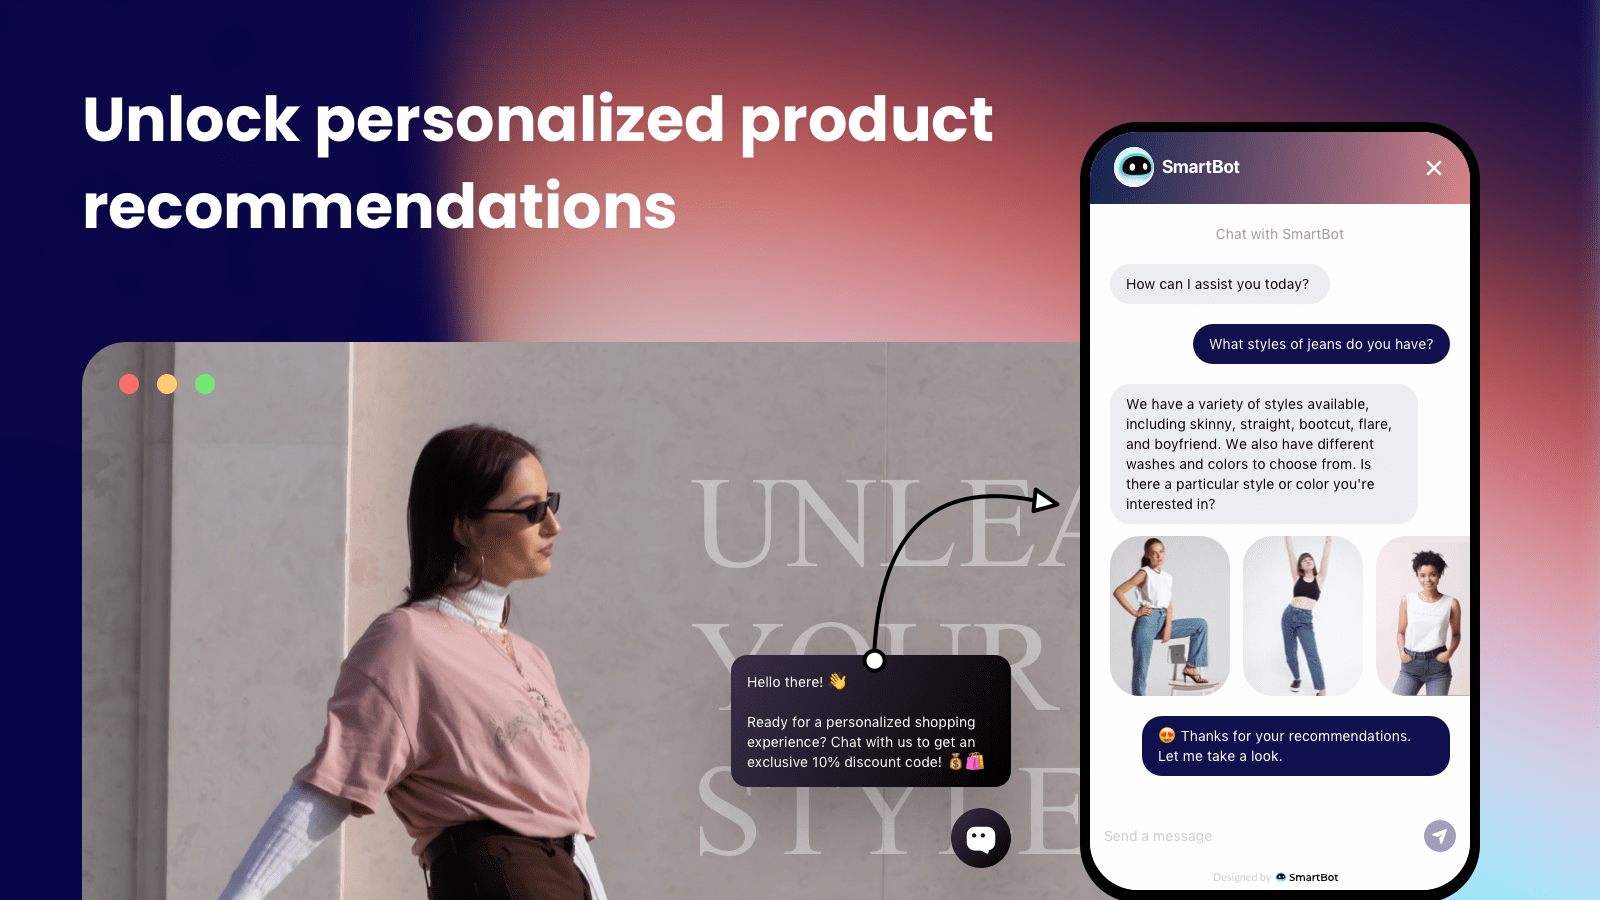 Personalized product recommendations